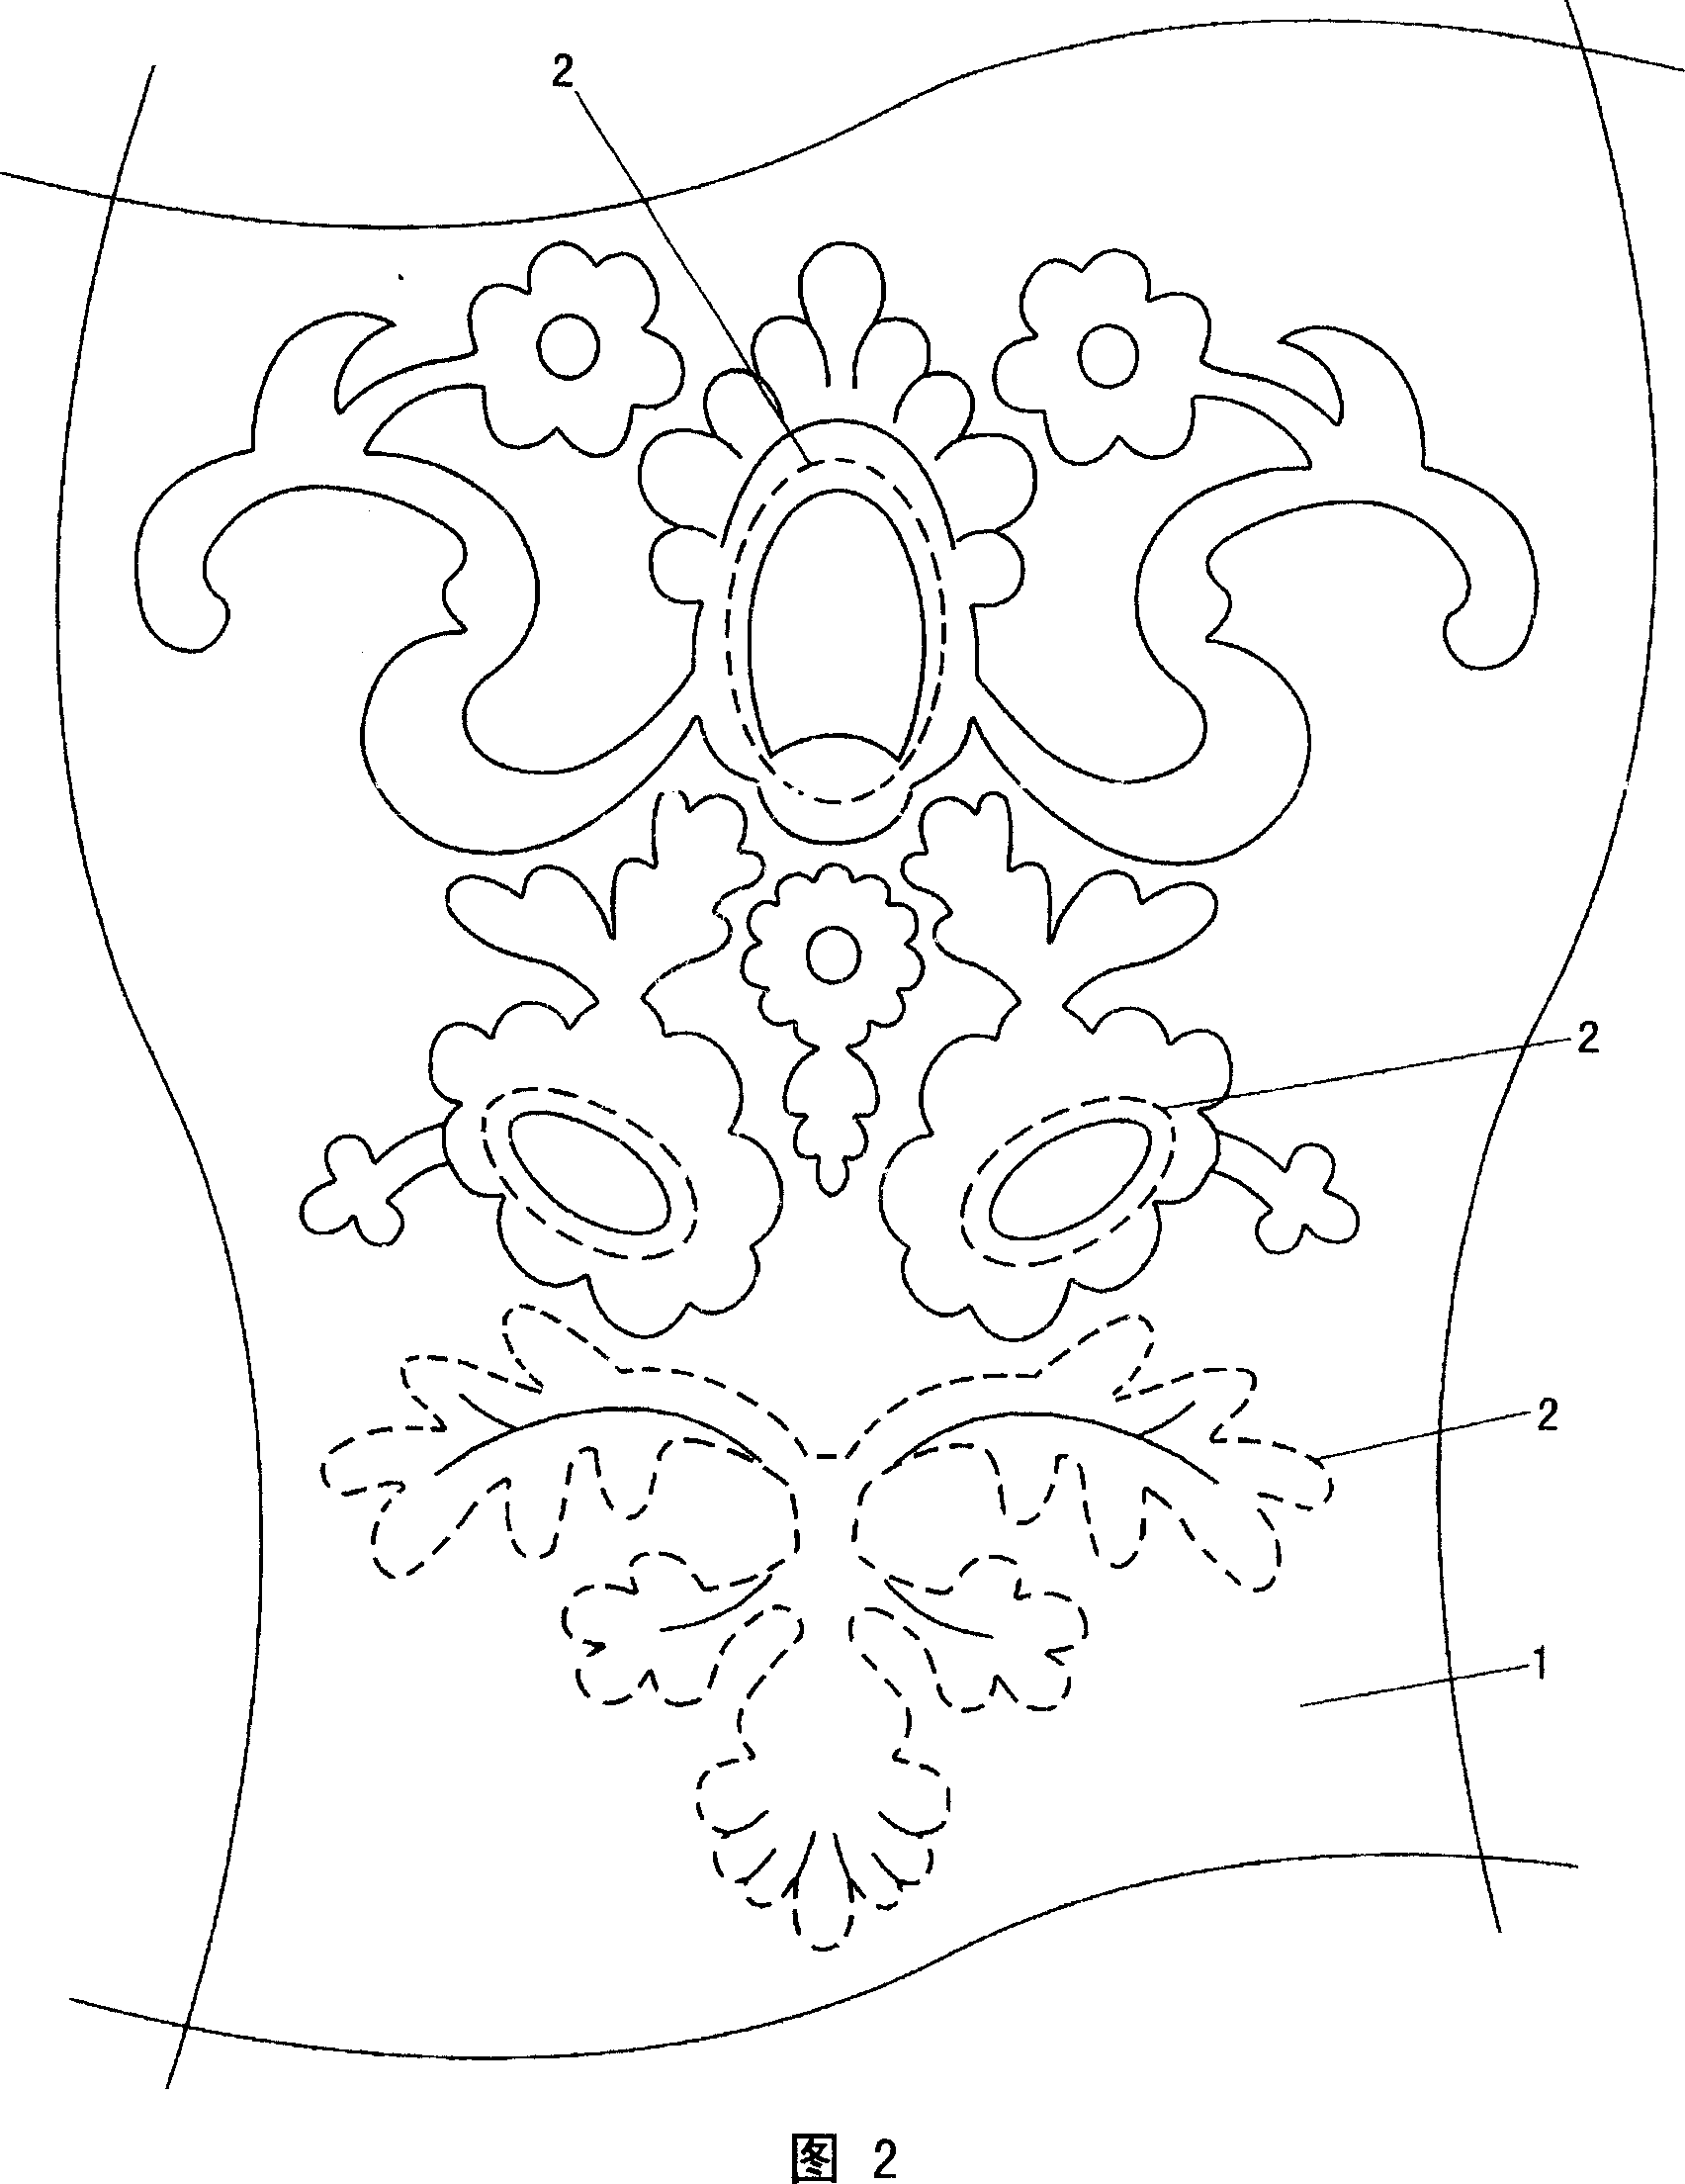 Processing method for carving hollow applique/embroider in textile